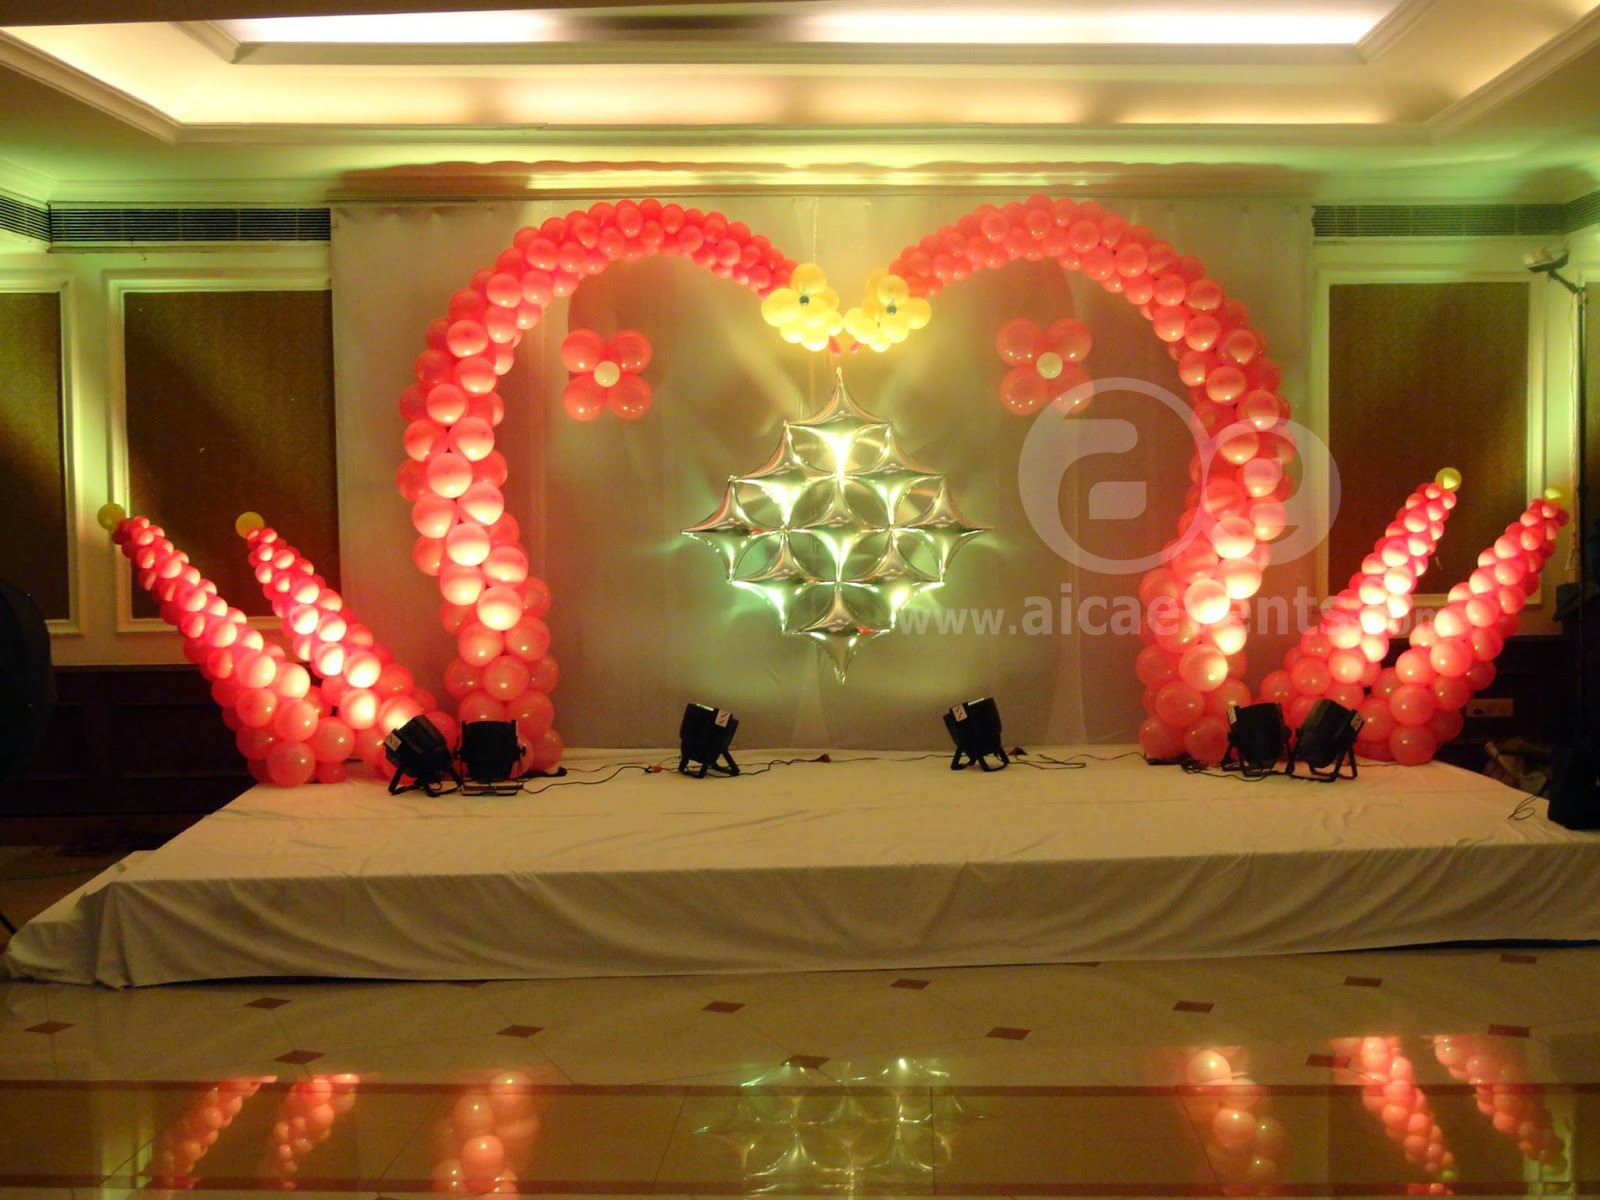 aicaevents Balloon Decorations  with different stage  back 